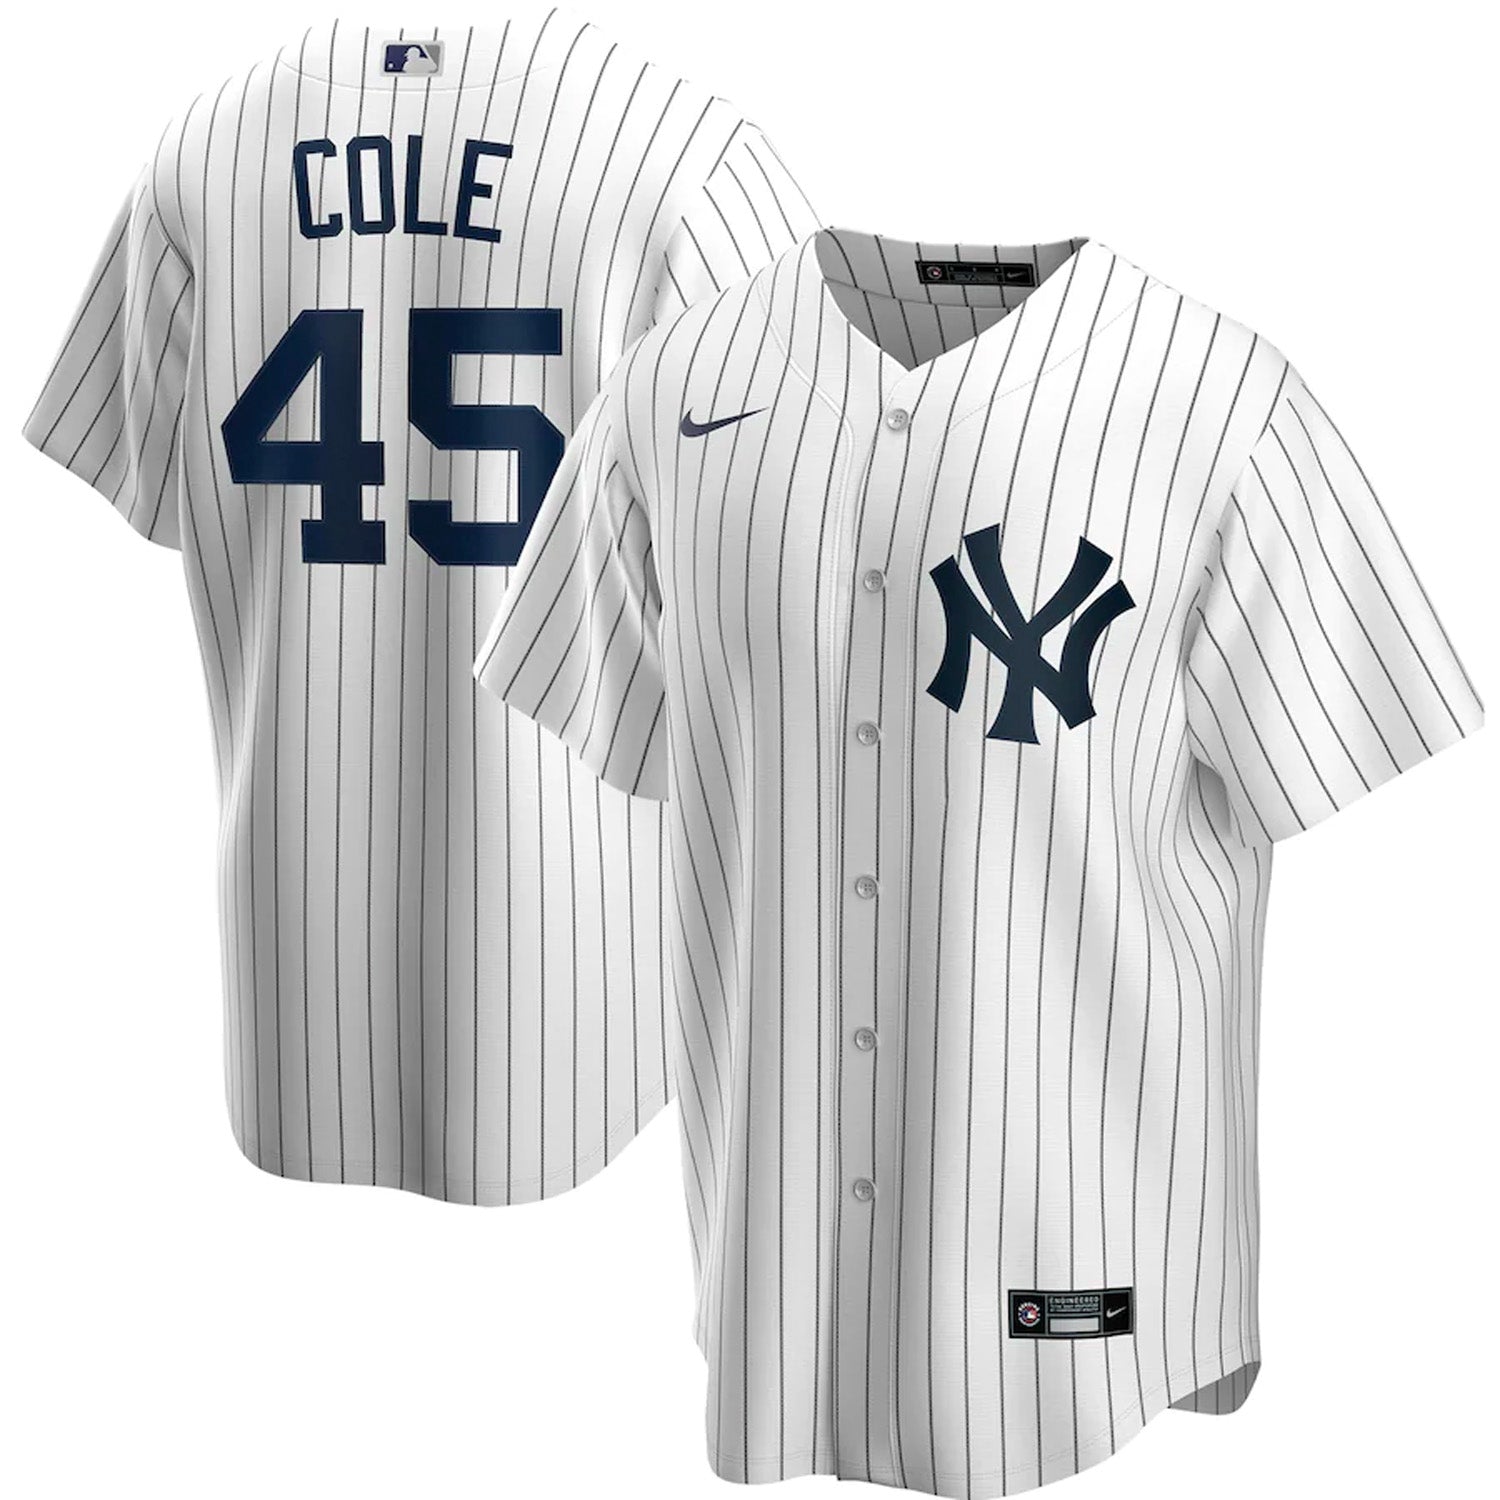 Gerrit Cole New York Yankees Game-Used #45 White Pinstripe Jersey